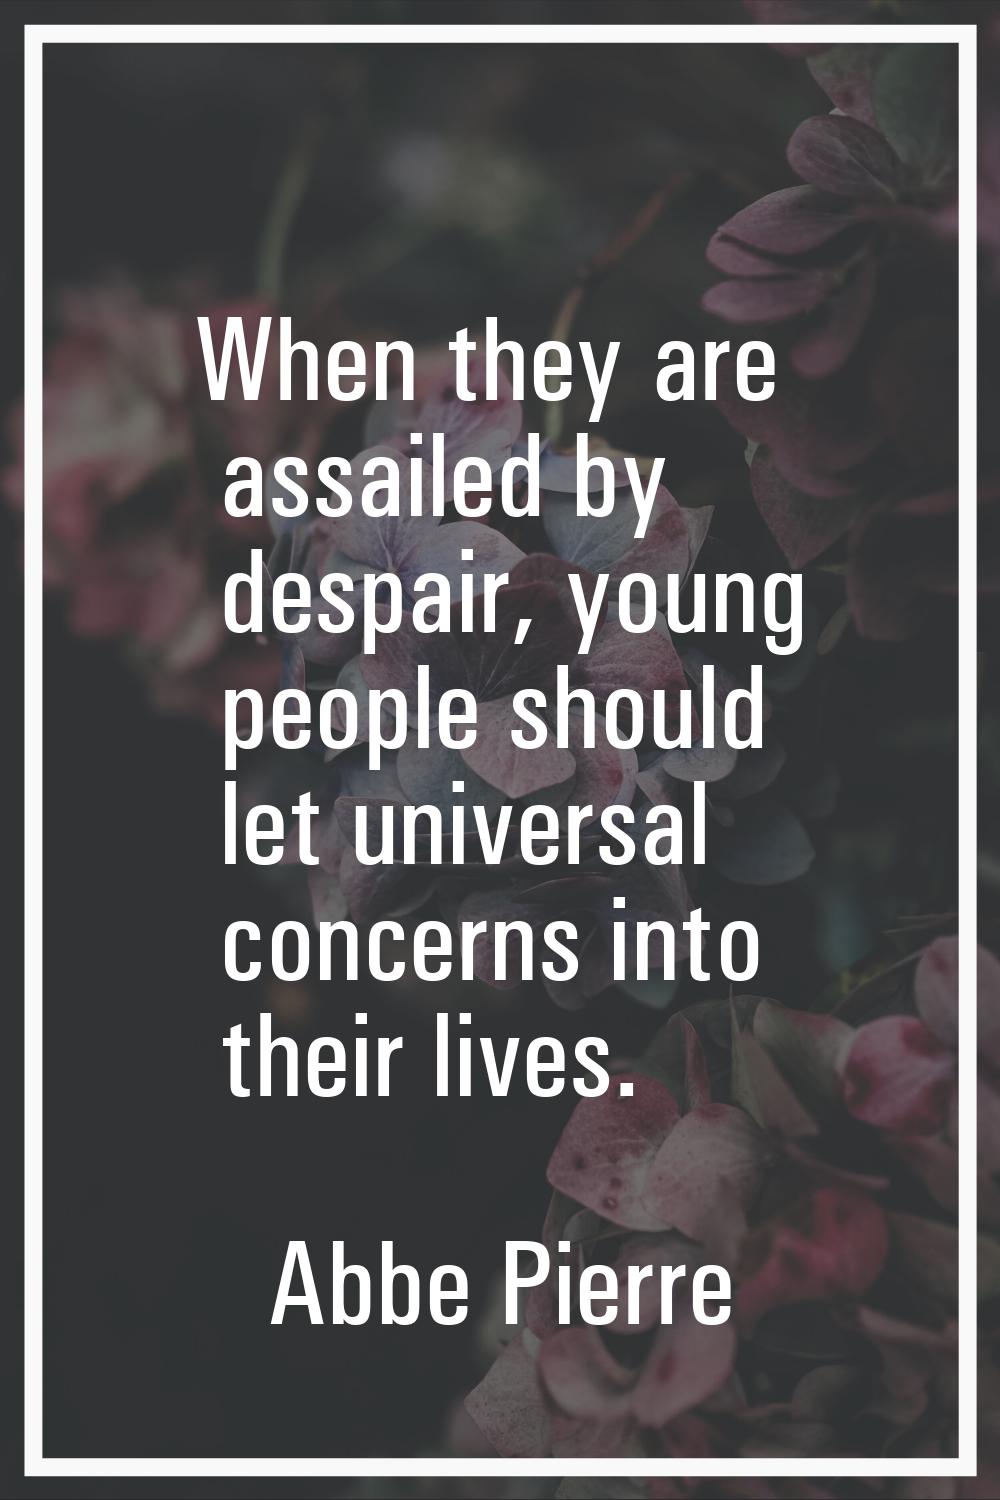 When they are assailed by despair, young people should let universal concerns into their lives.